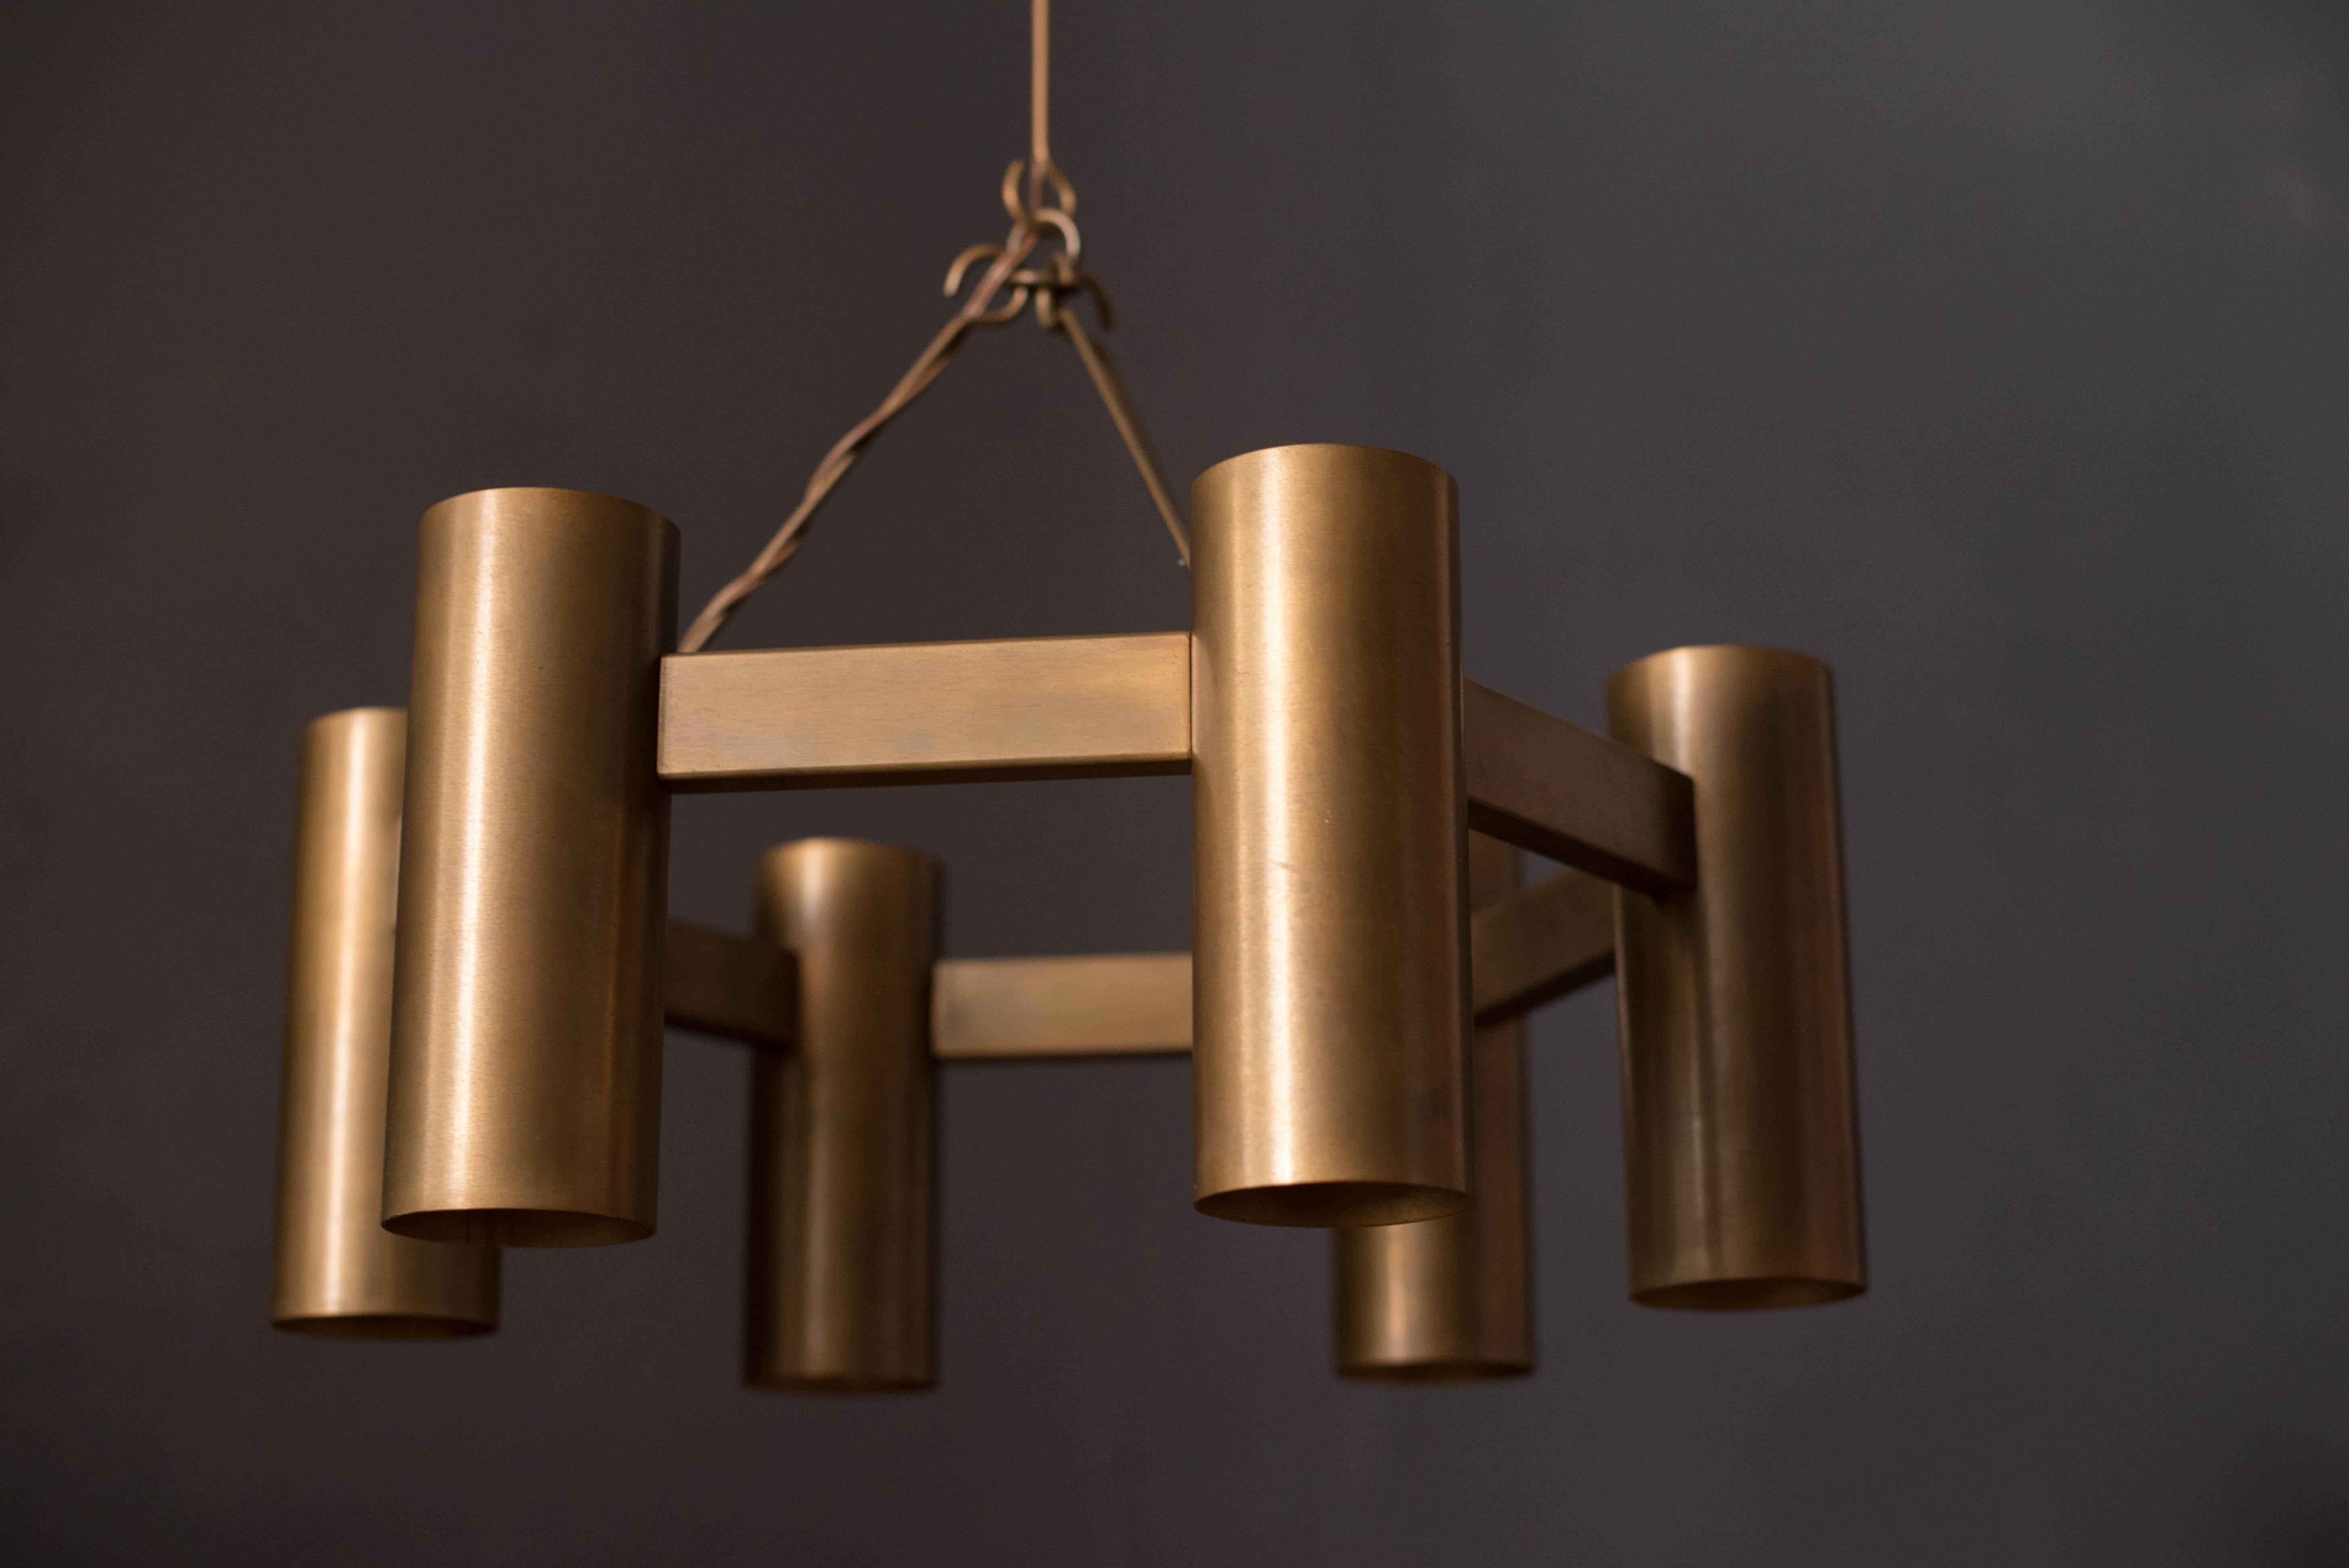 Mid Century industrial modern chandelier fixture by Stuart Barnes for Robert Long, circa 1960s of Sausalito, California. This piece features aged brass and includes six cylinders that expose light from the top and bottom. Includes two 12